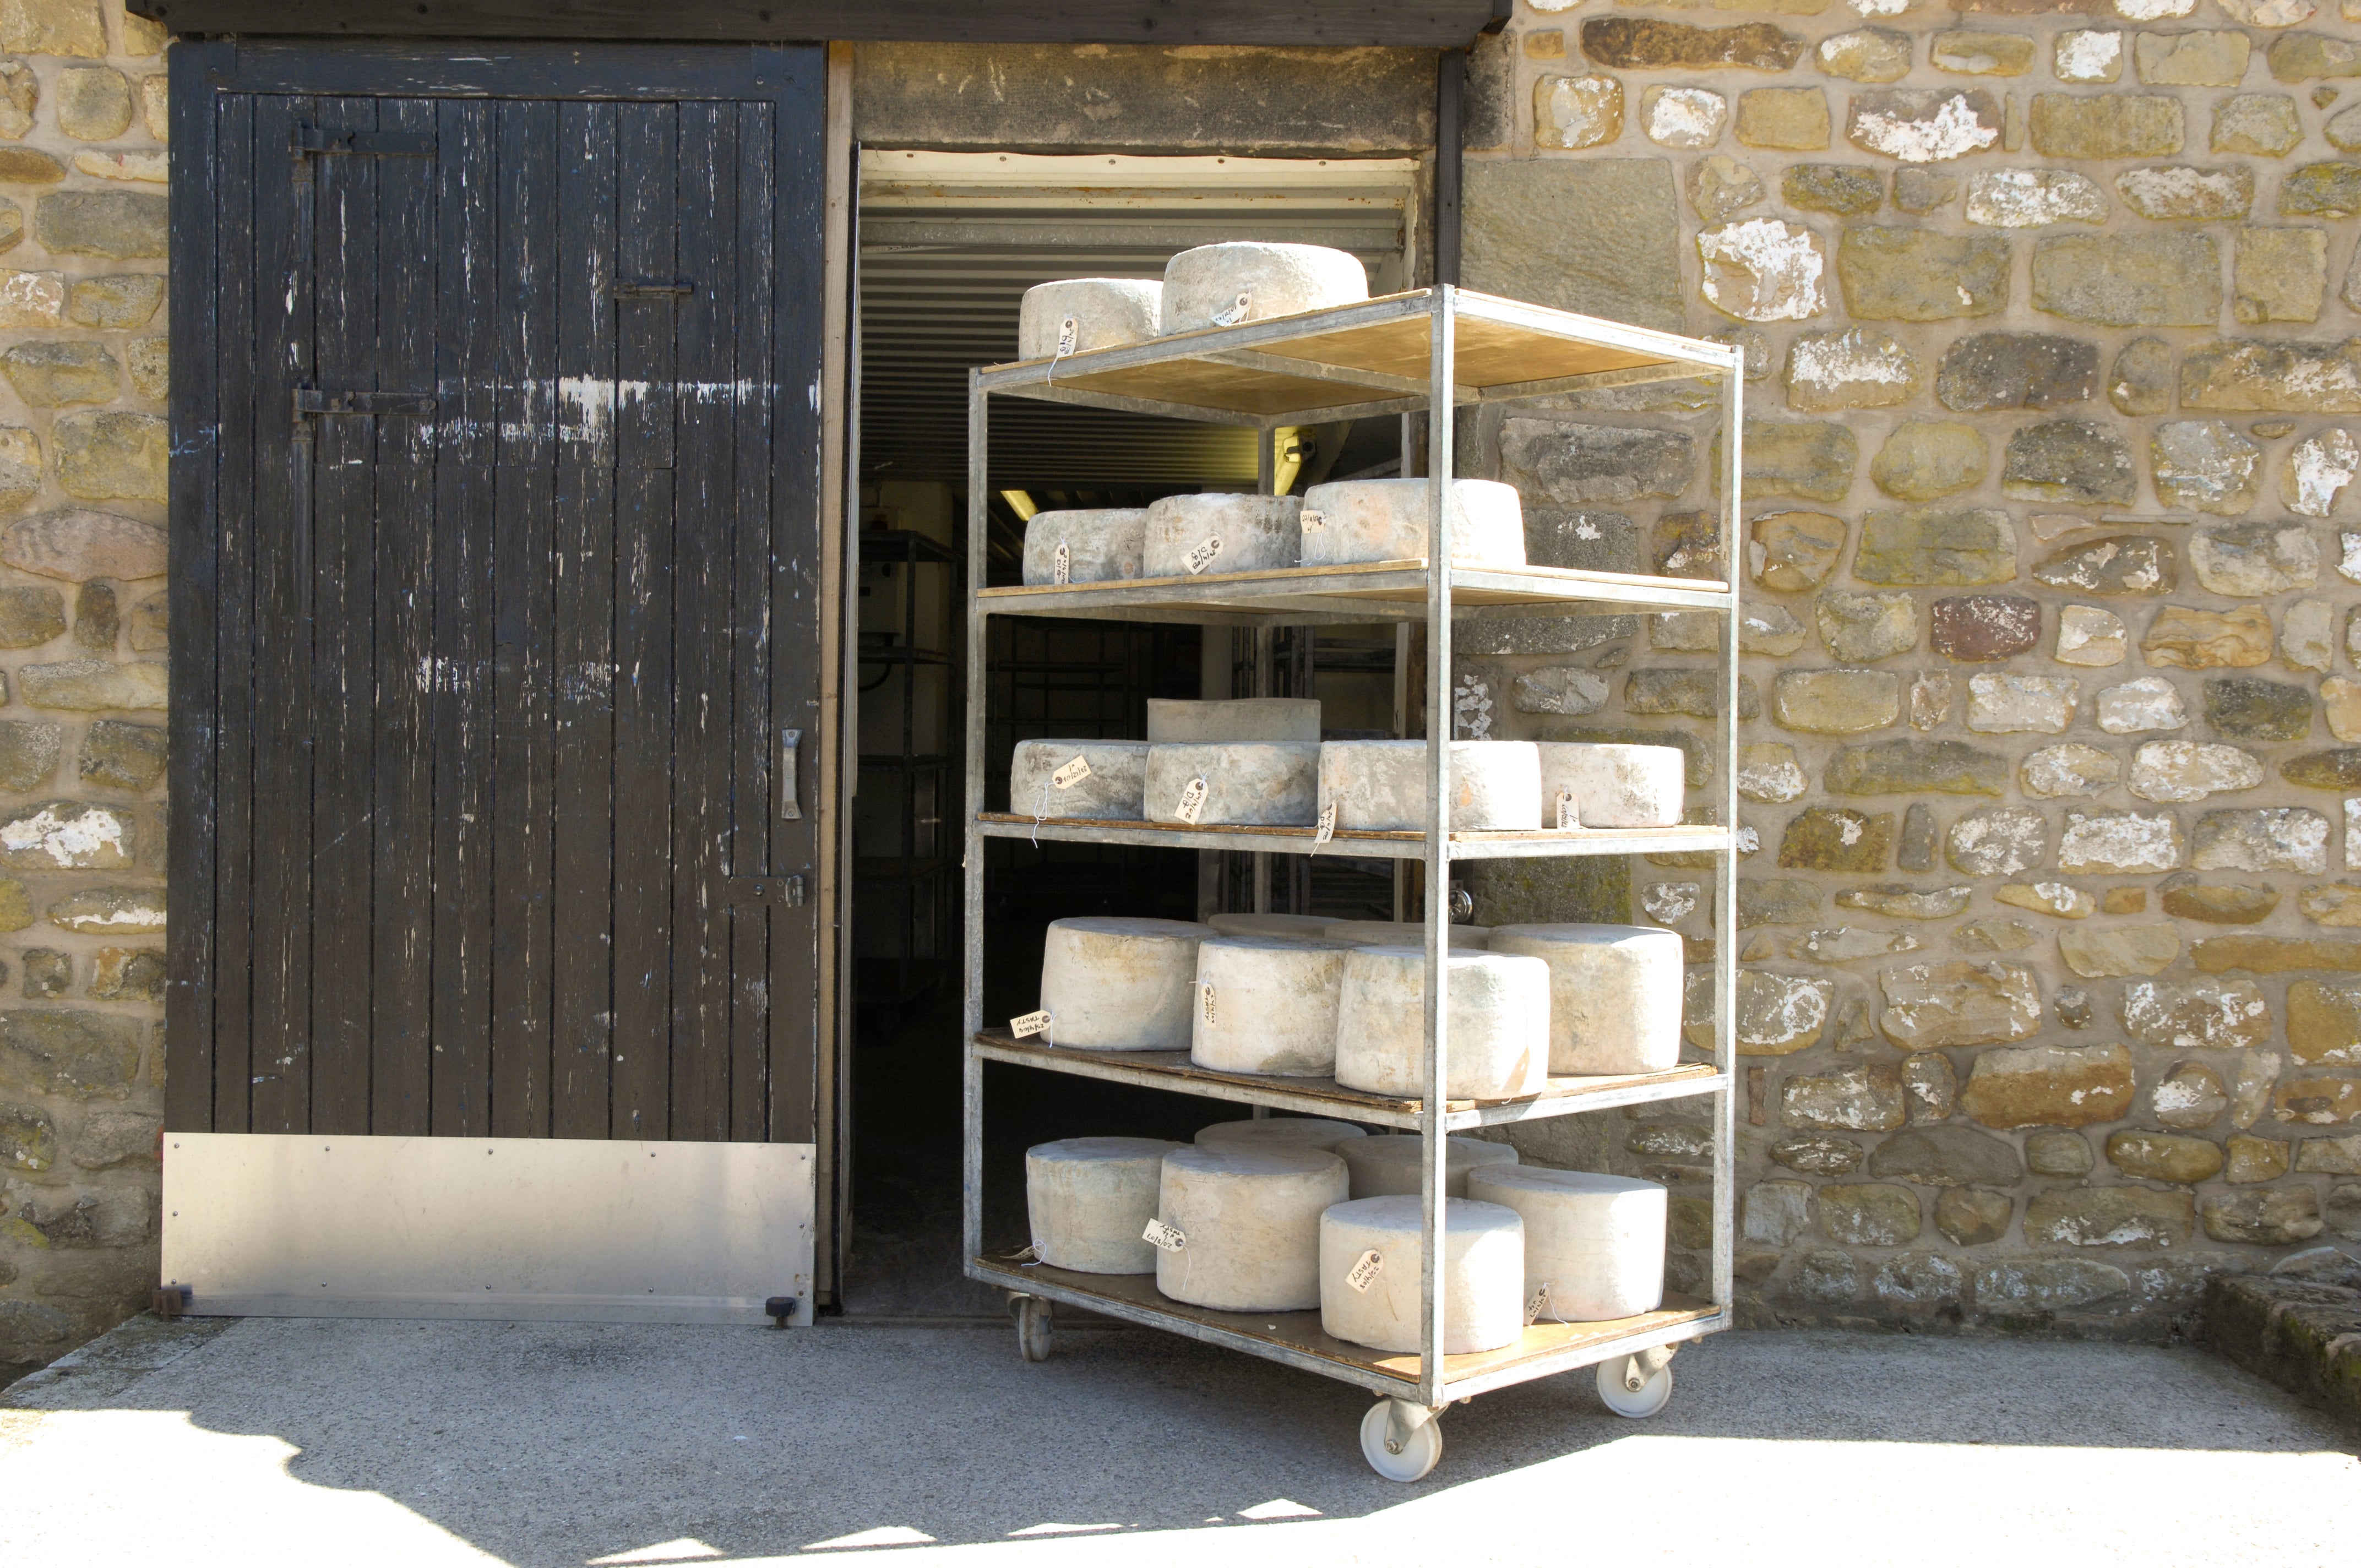 The Story of How King Charles Helped Save British Farmhouse Cheese